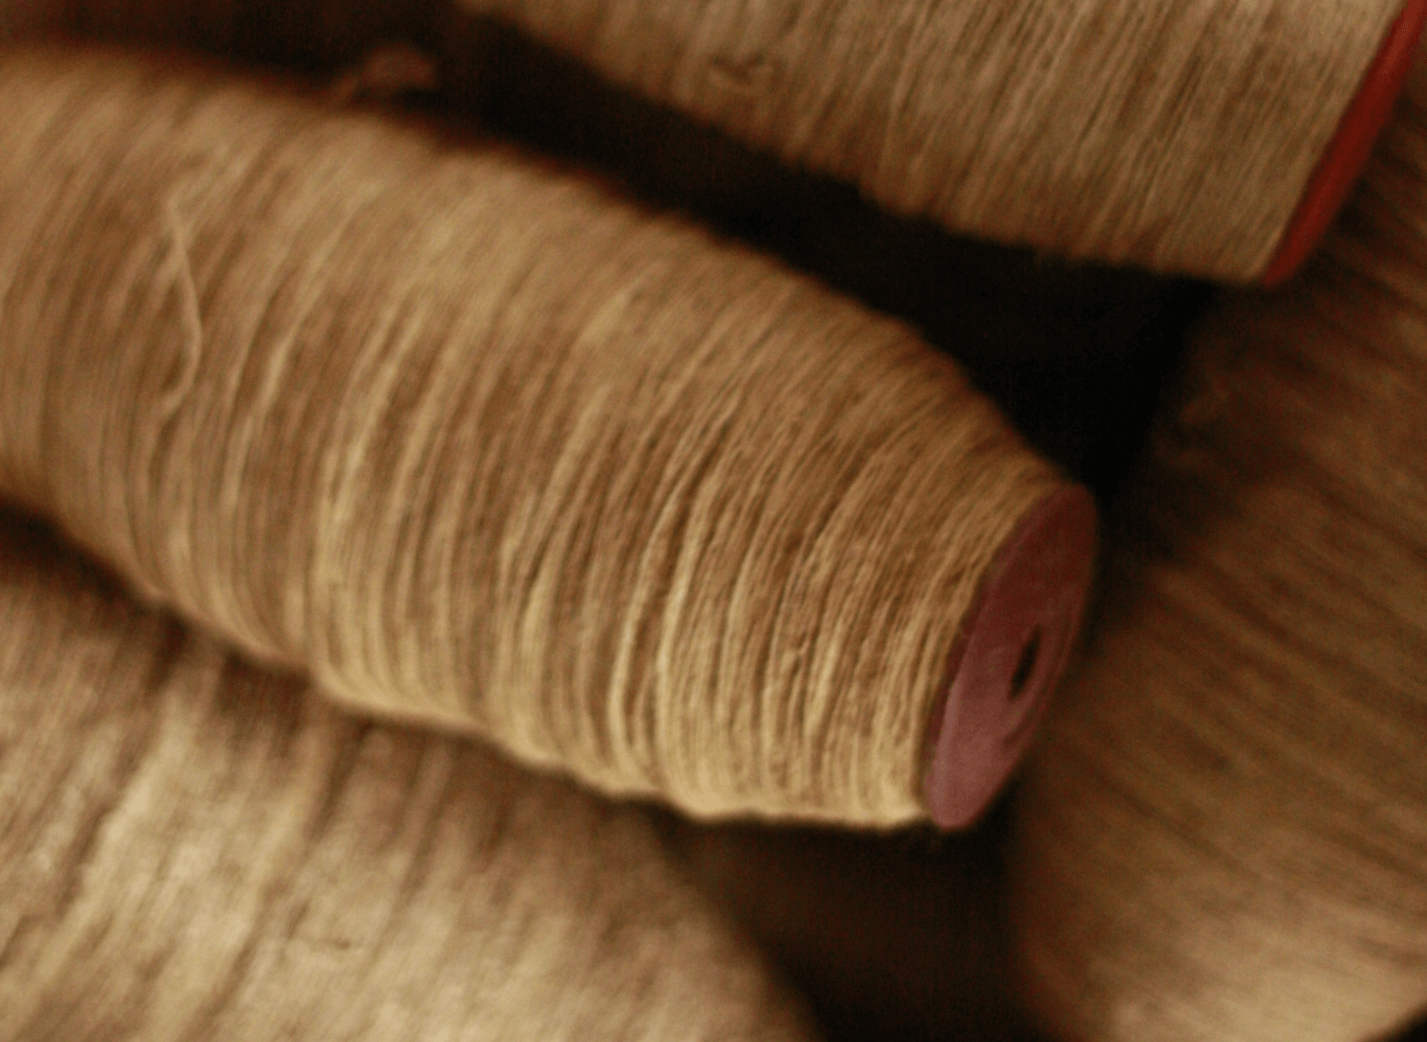 Close-up of a group of yarn
Description automatically generated